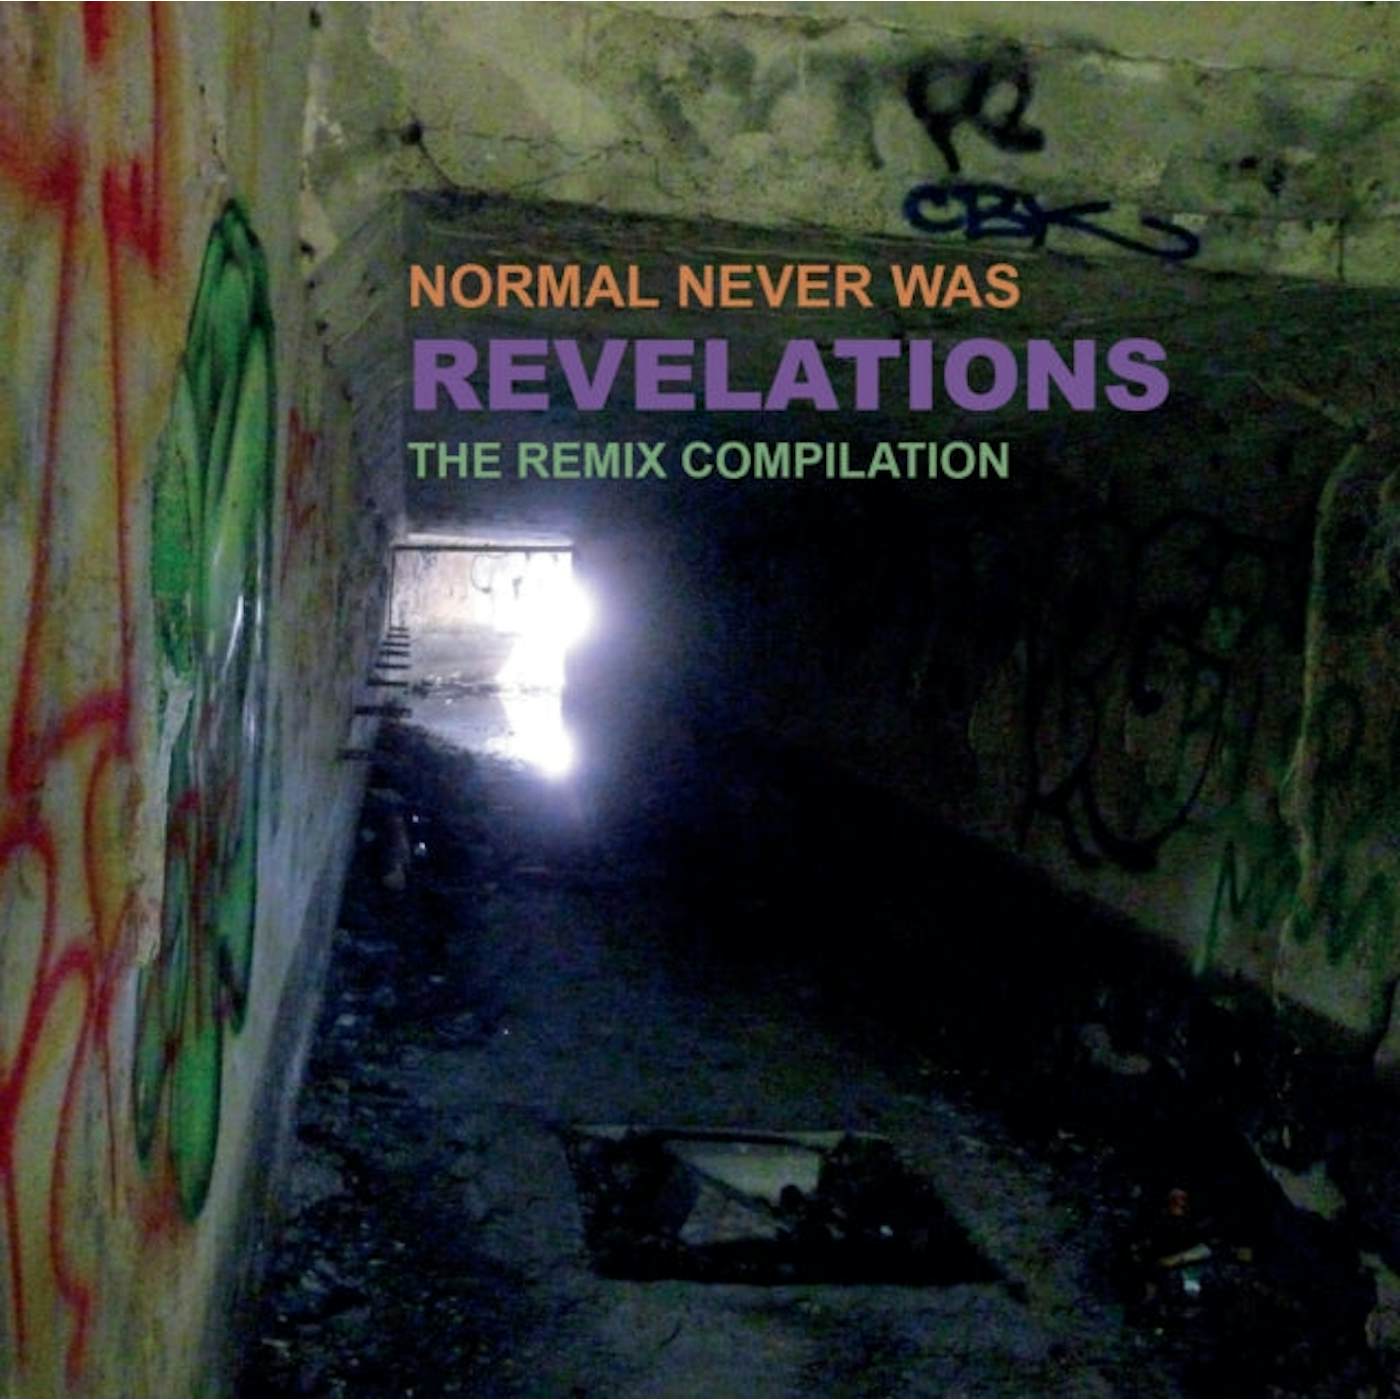 Crass CD - Normal Never Was - Revelations - The Remix Compilation